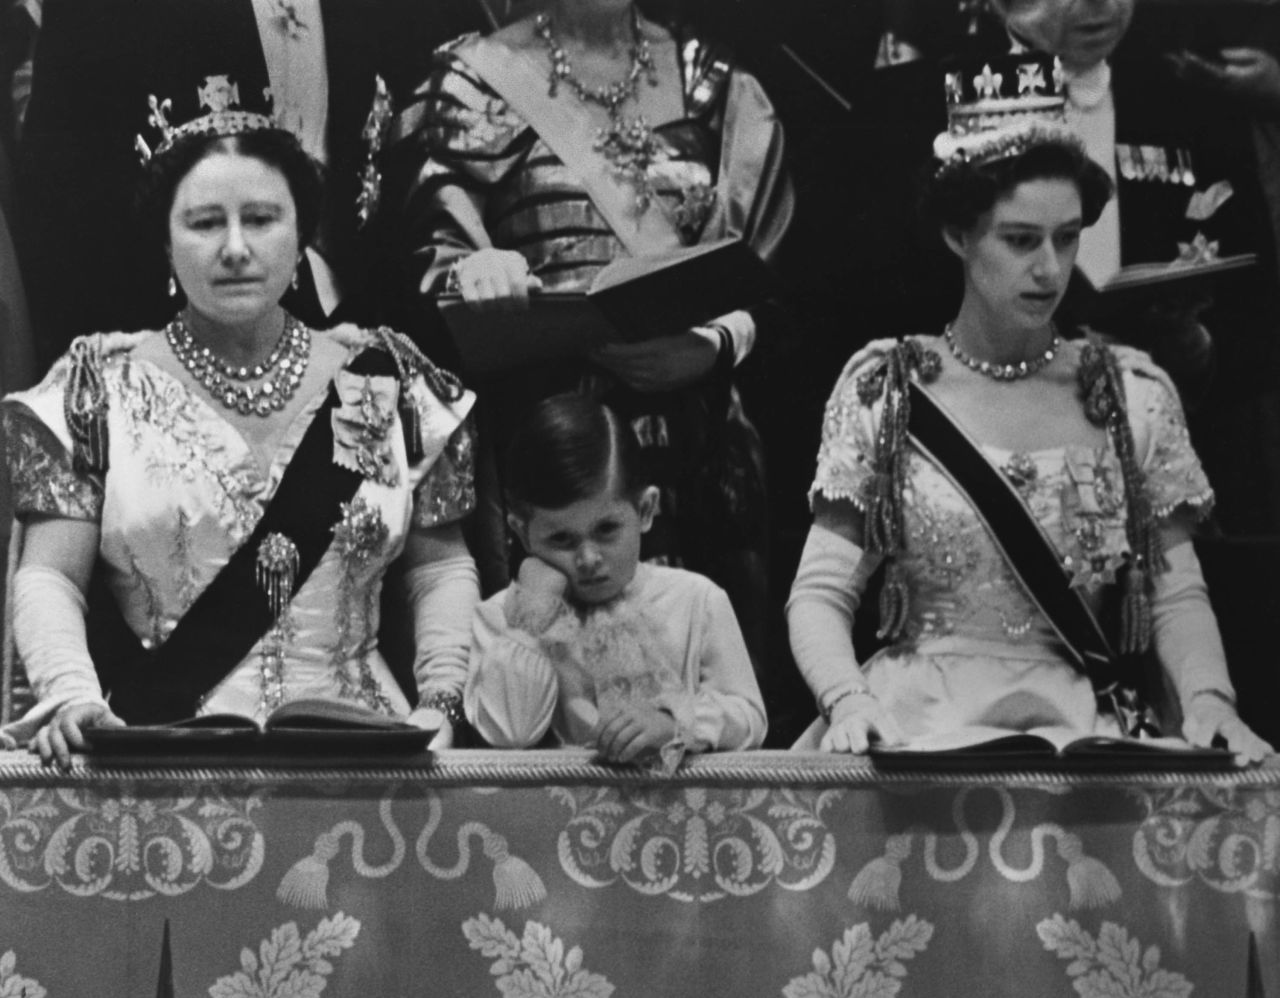 Prince Charles watches his mother's coronation. On the left is his grandmother, the Queen Mother. At right is his aunt, Princess Margaret.